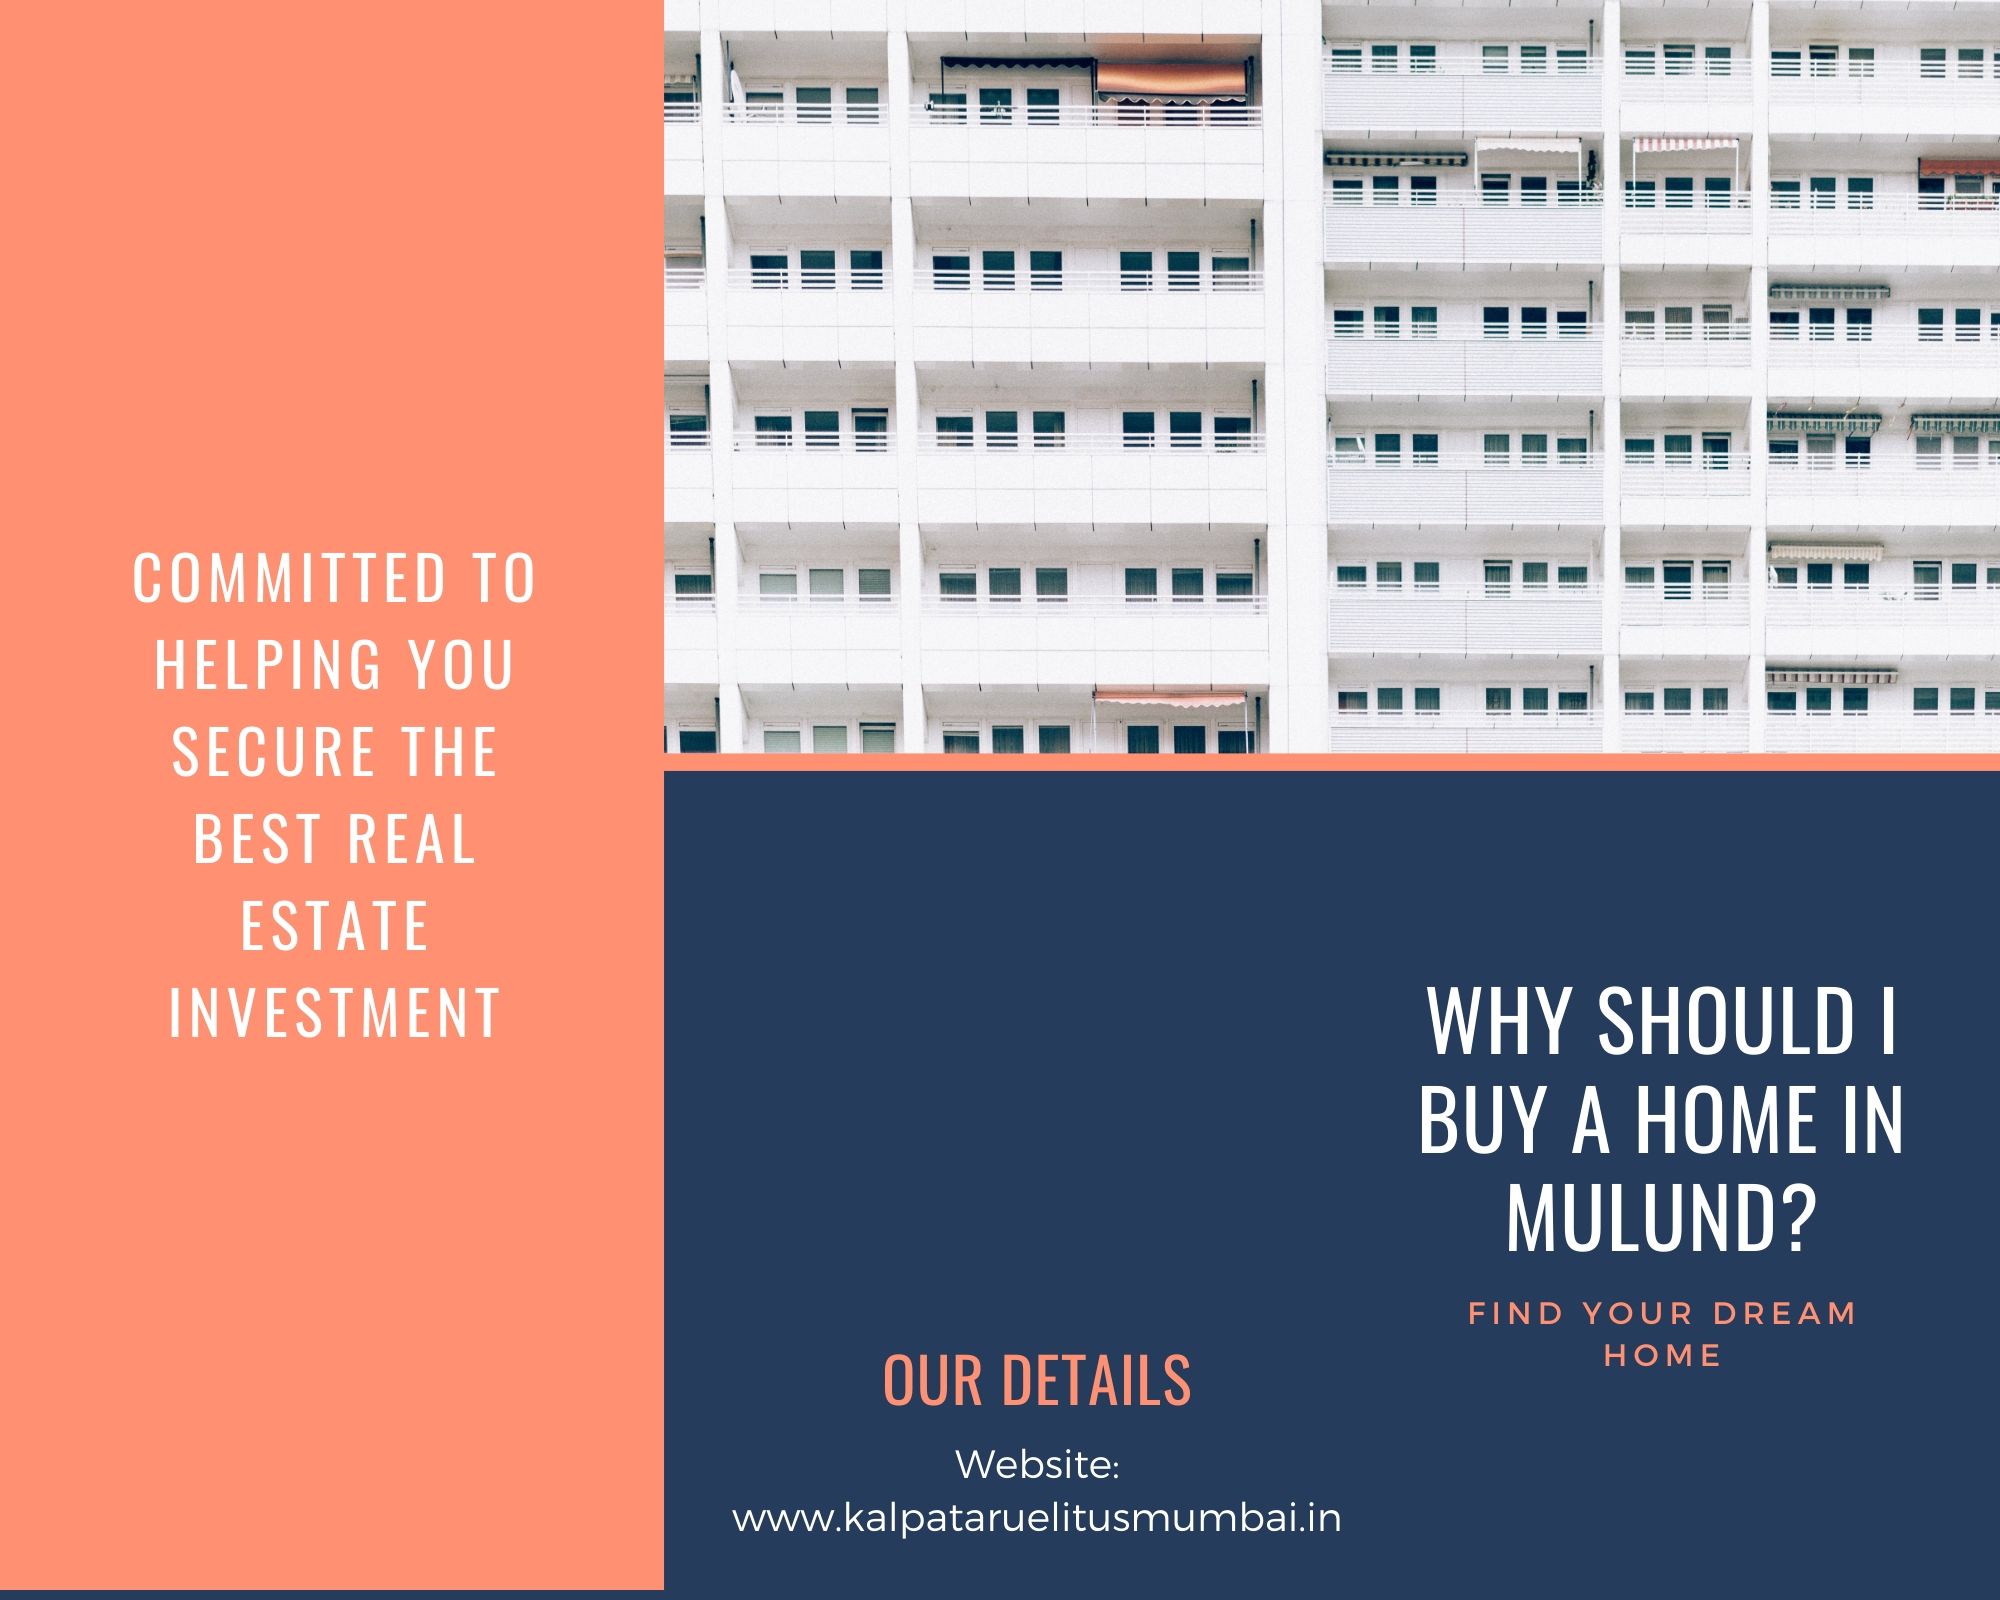 Why should I buy a home in Mulund?